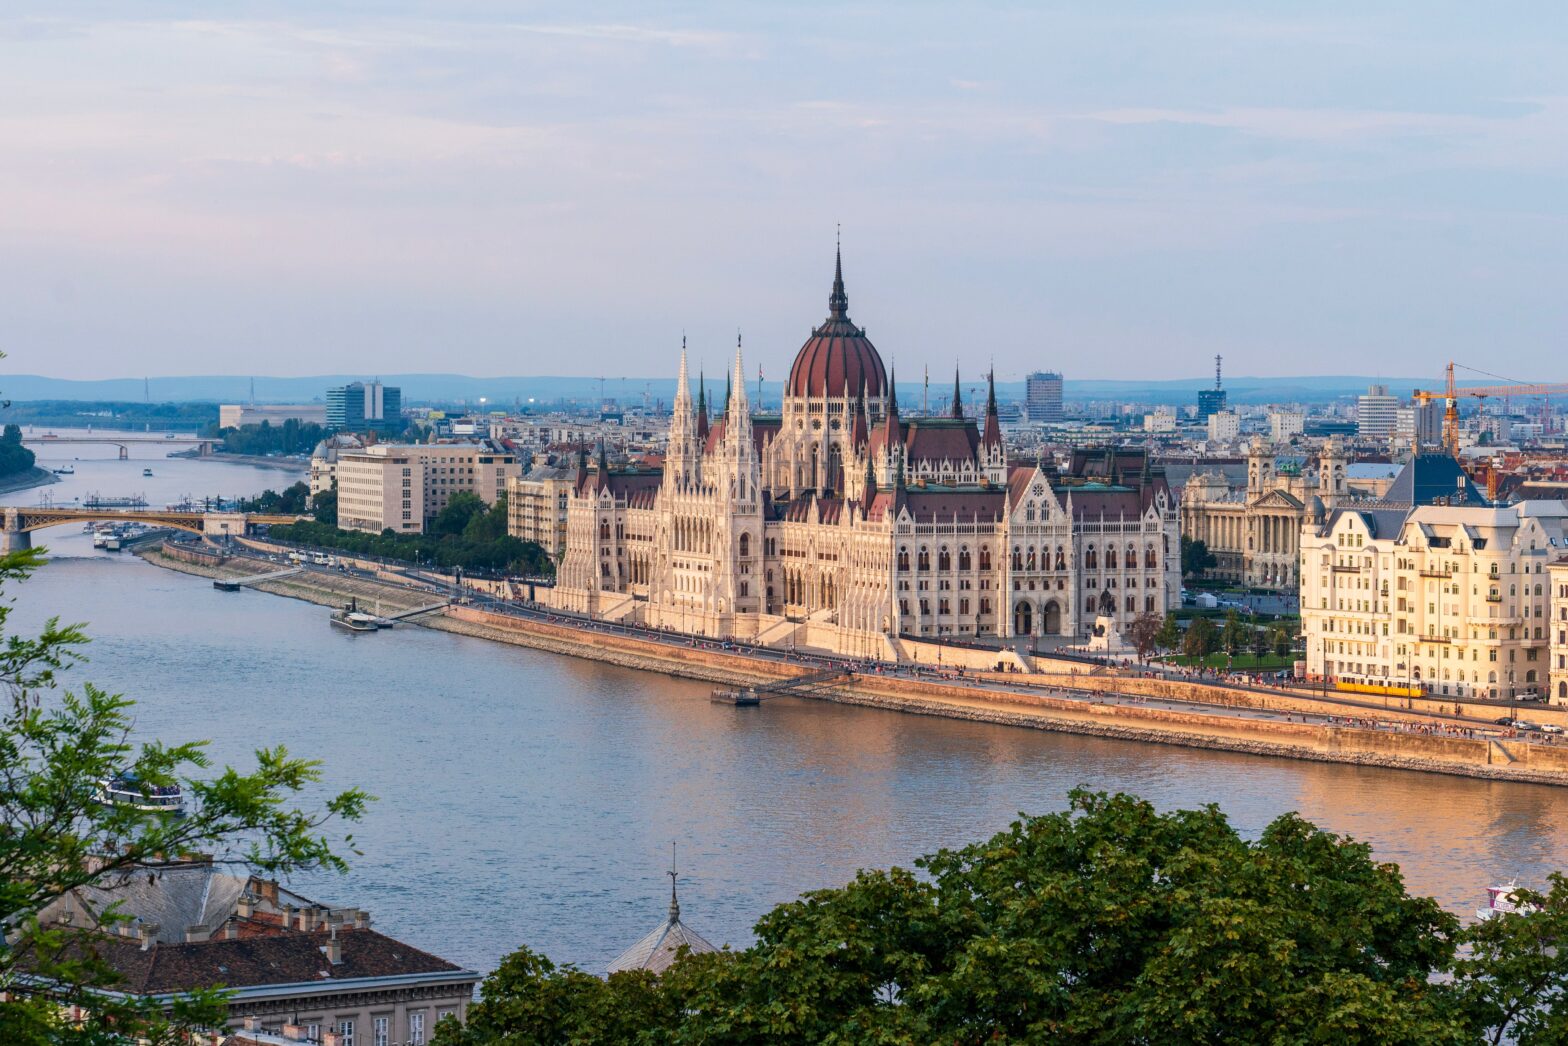 sky view of Budapest - one of the best destination for European Summer tours